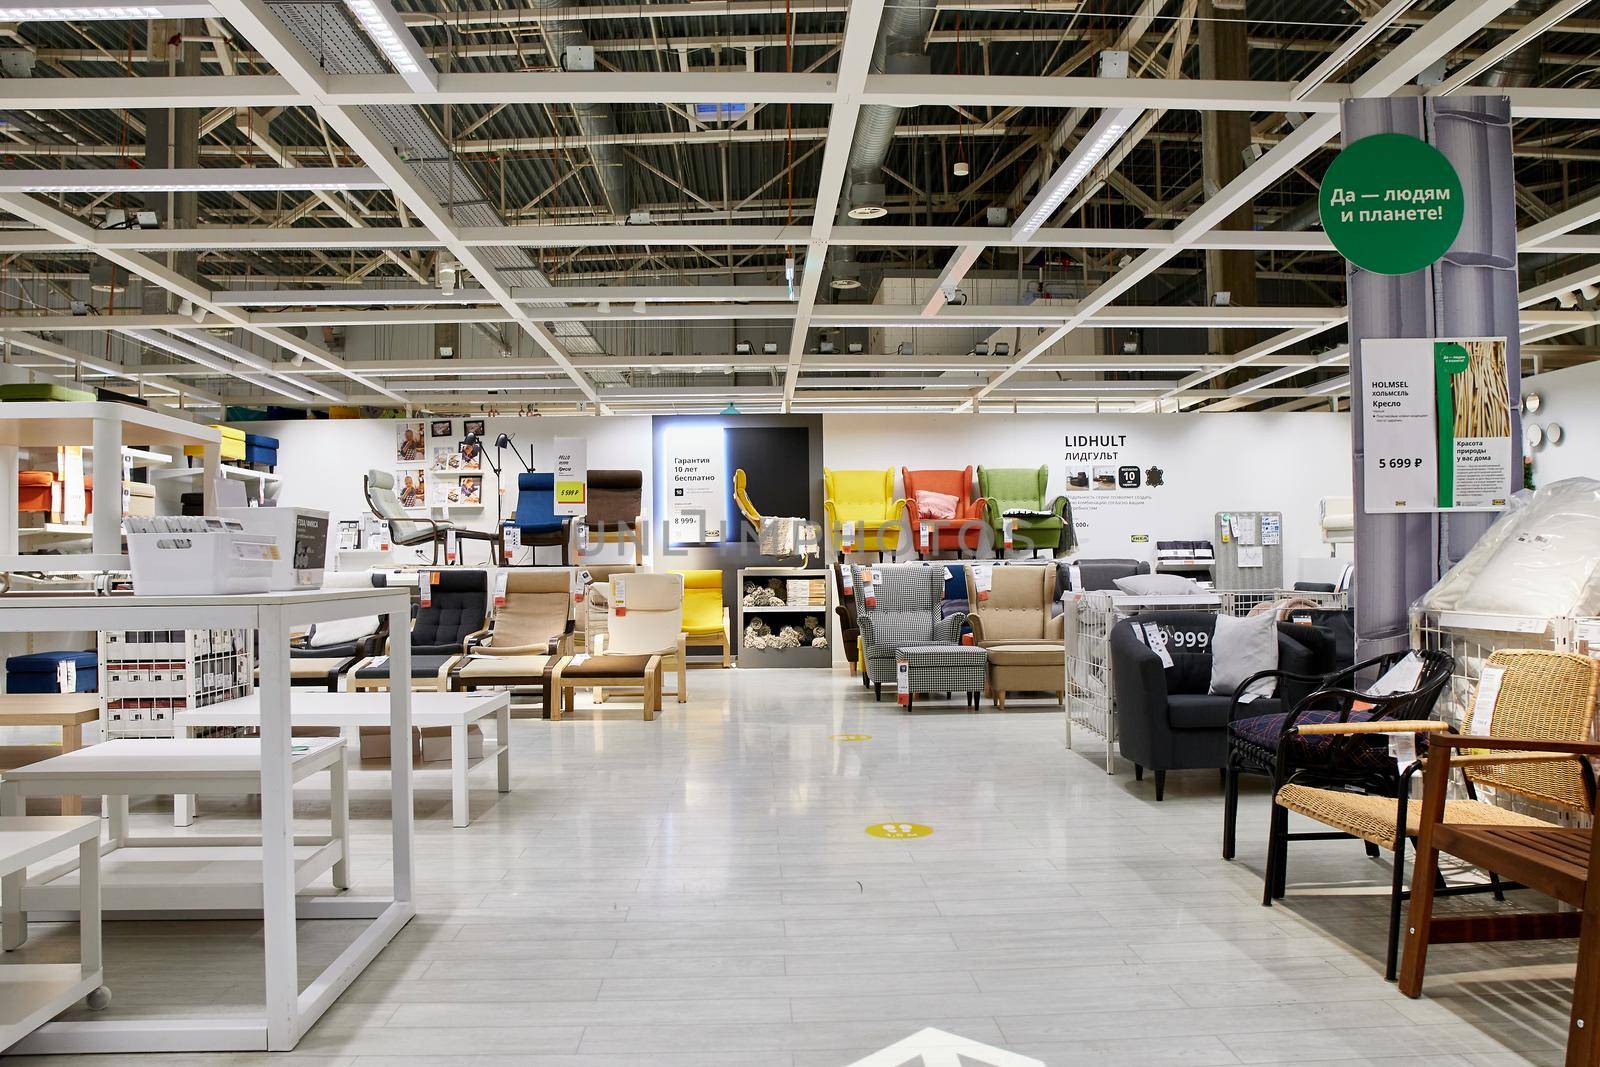 SAMARA, RUSSIA - JANUARY 10, 2022: Ikea store interior. people are shopping. IKEA is the world's largest furniture retailer.